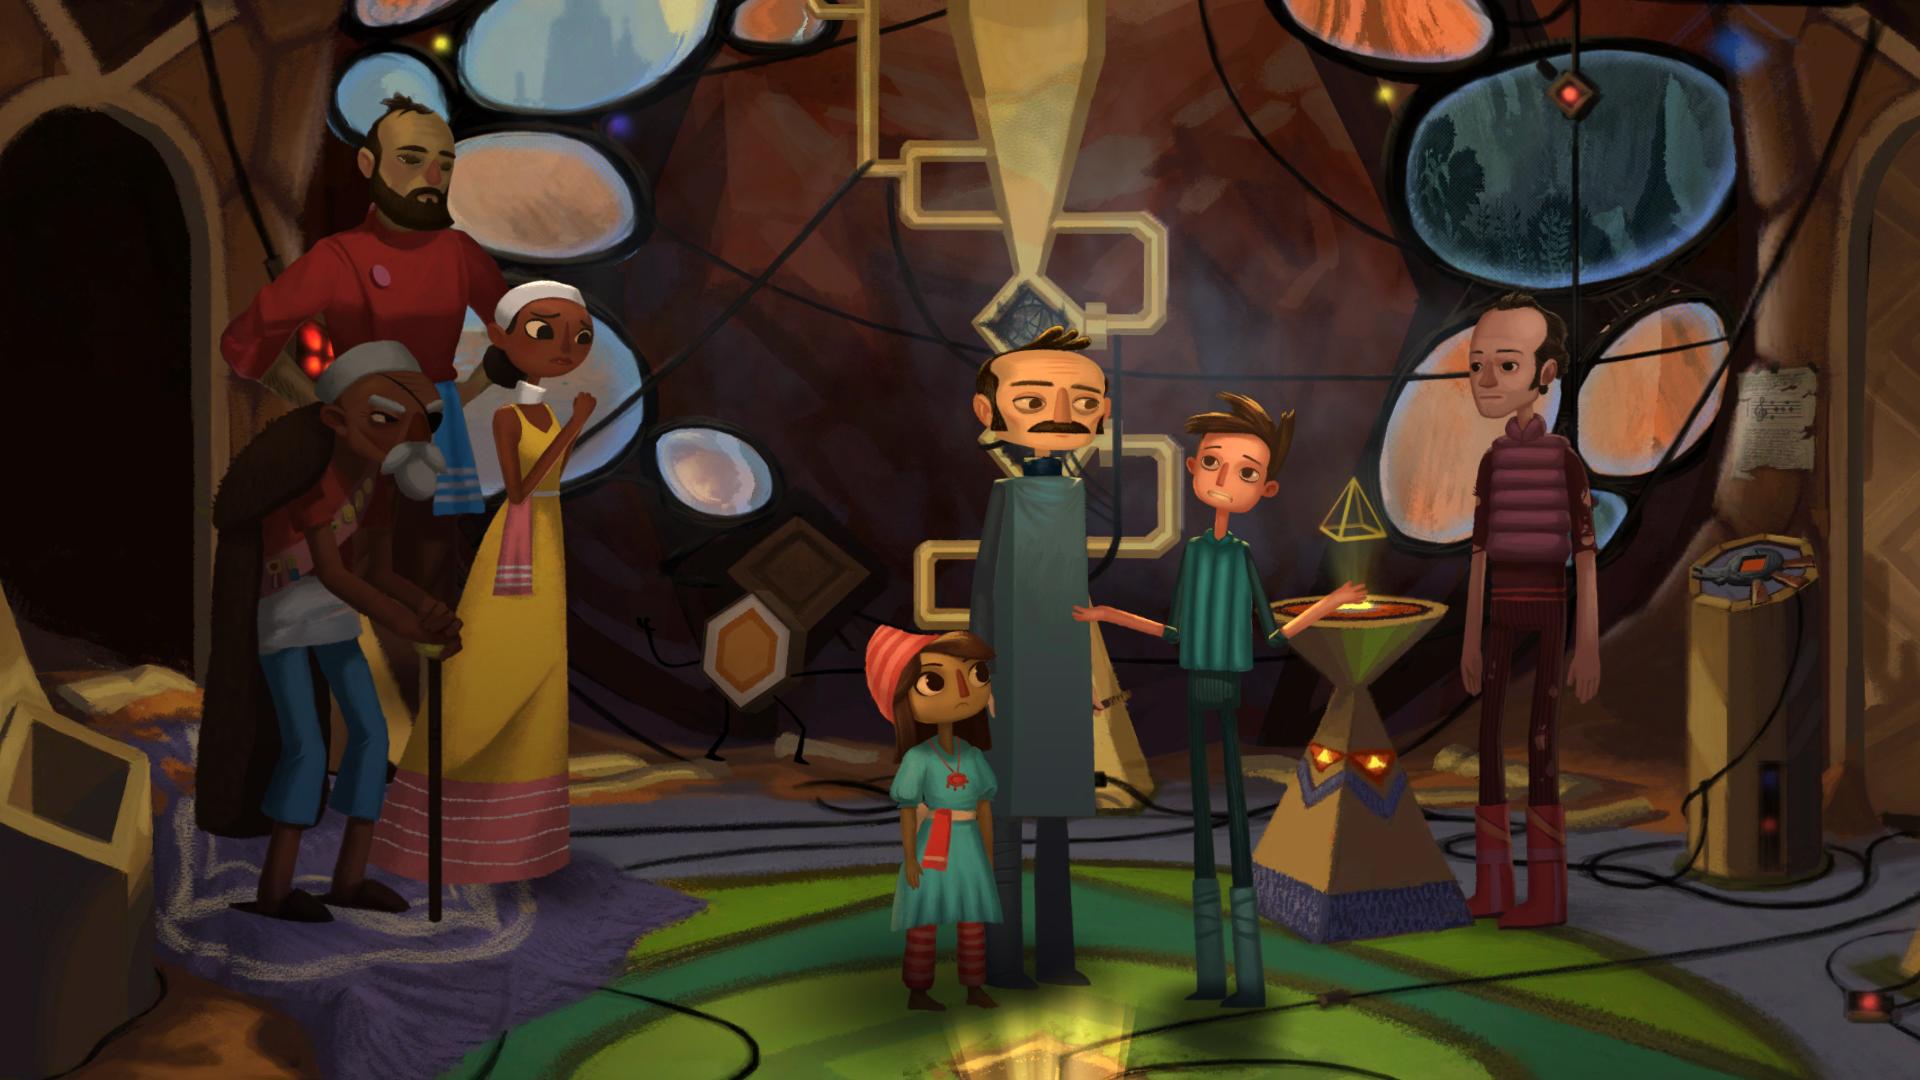 broken age flawless execution